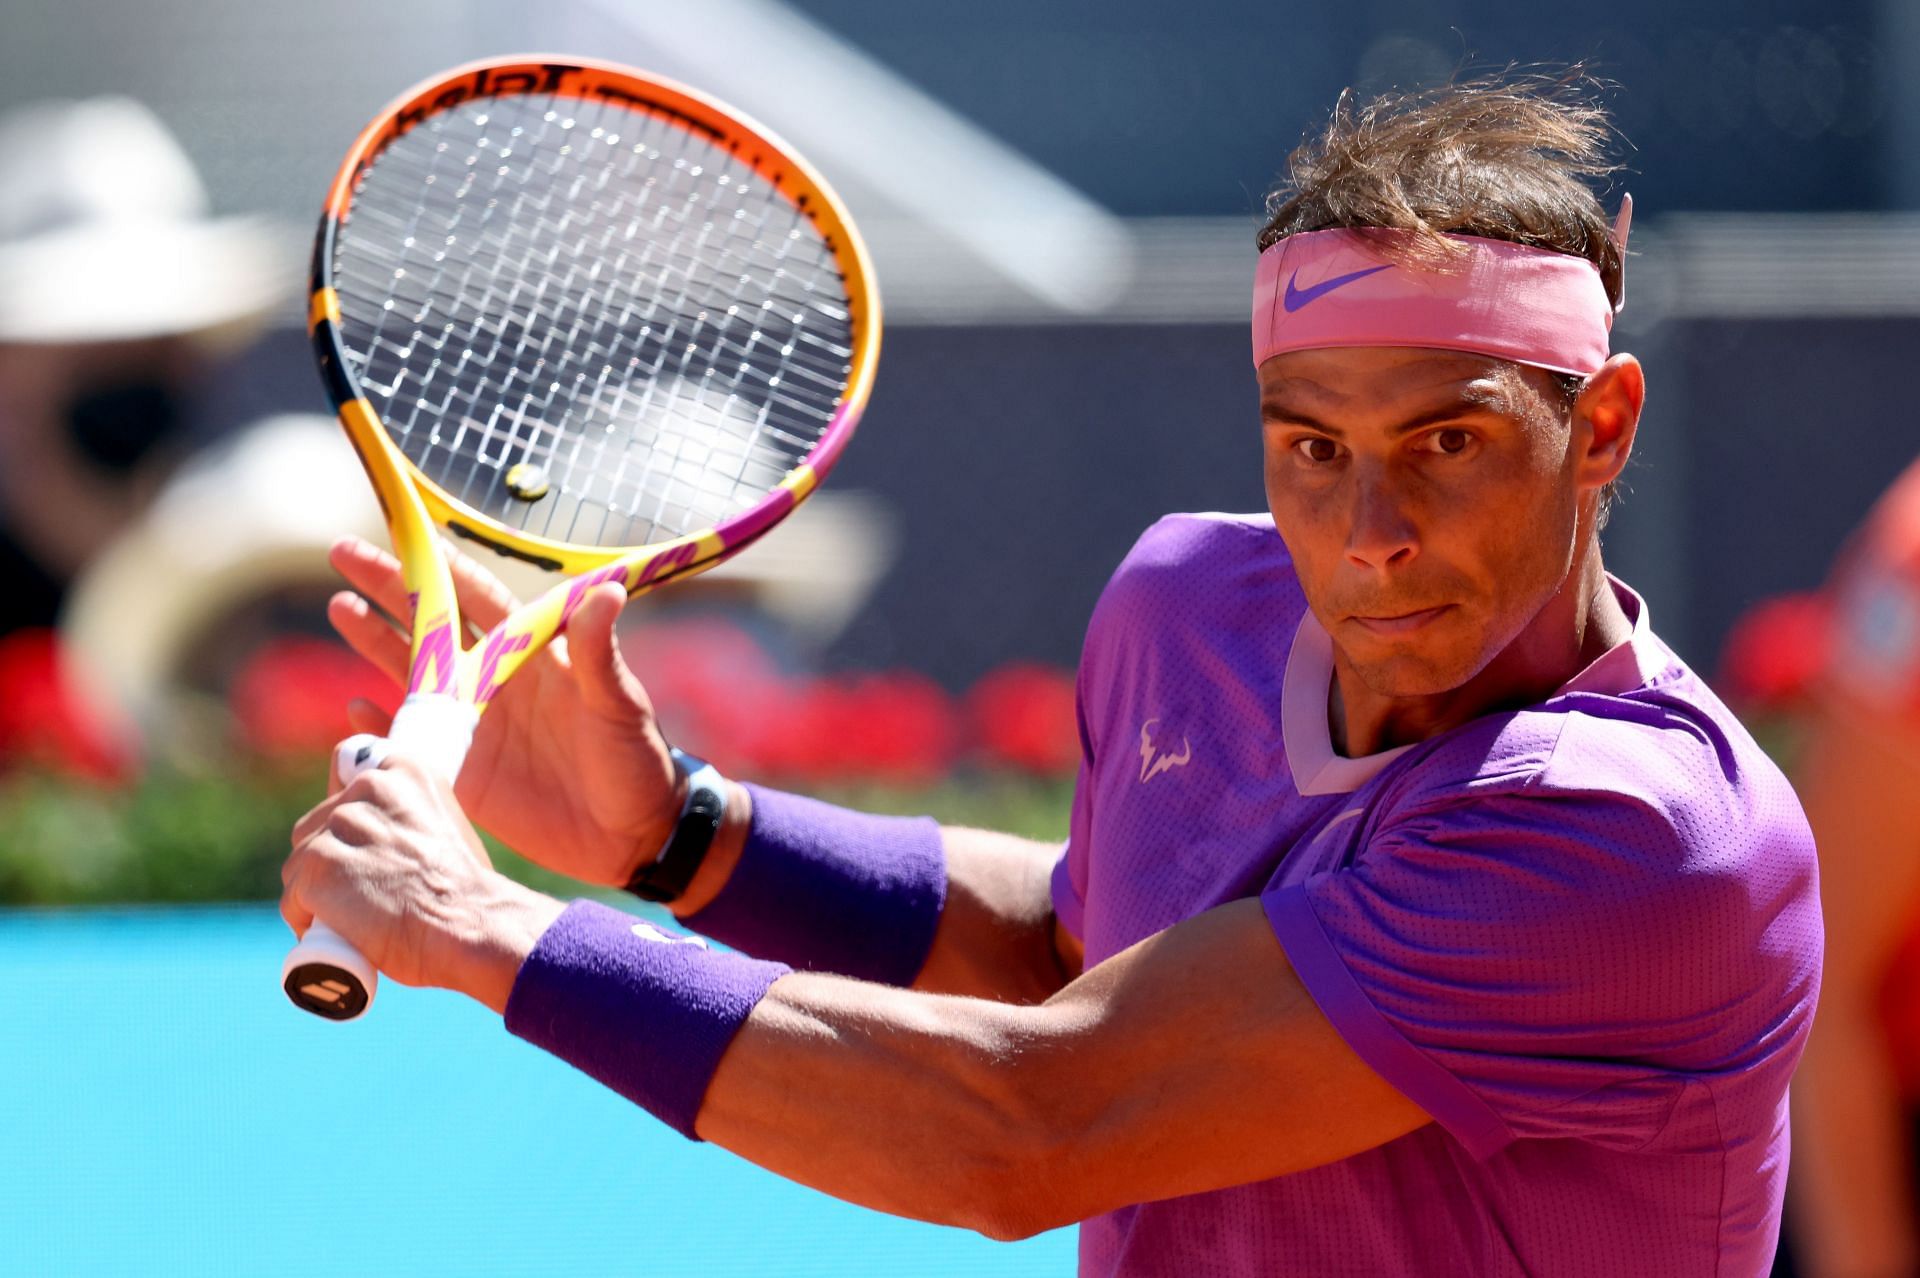 Madrid Open 2022: Where to watch, TV schedule, live streaming details